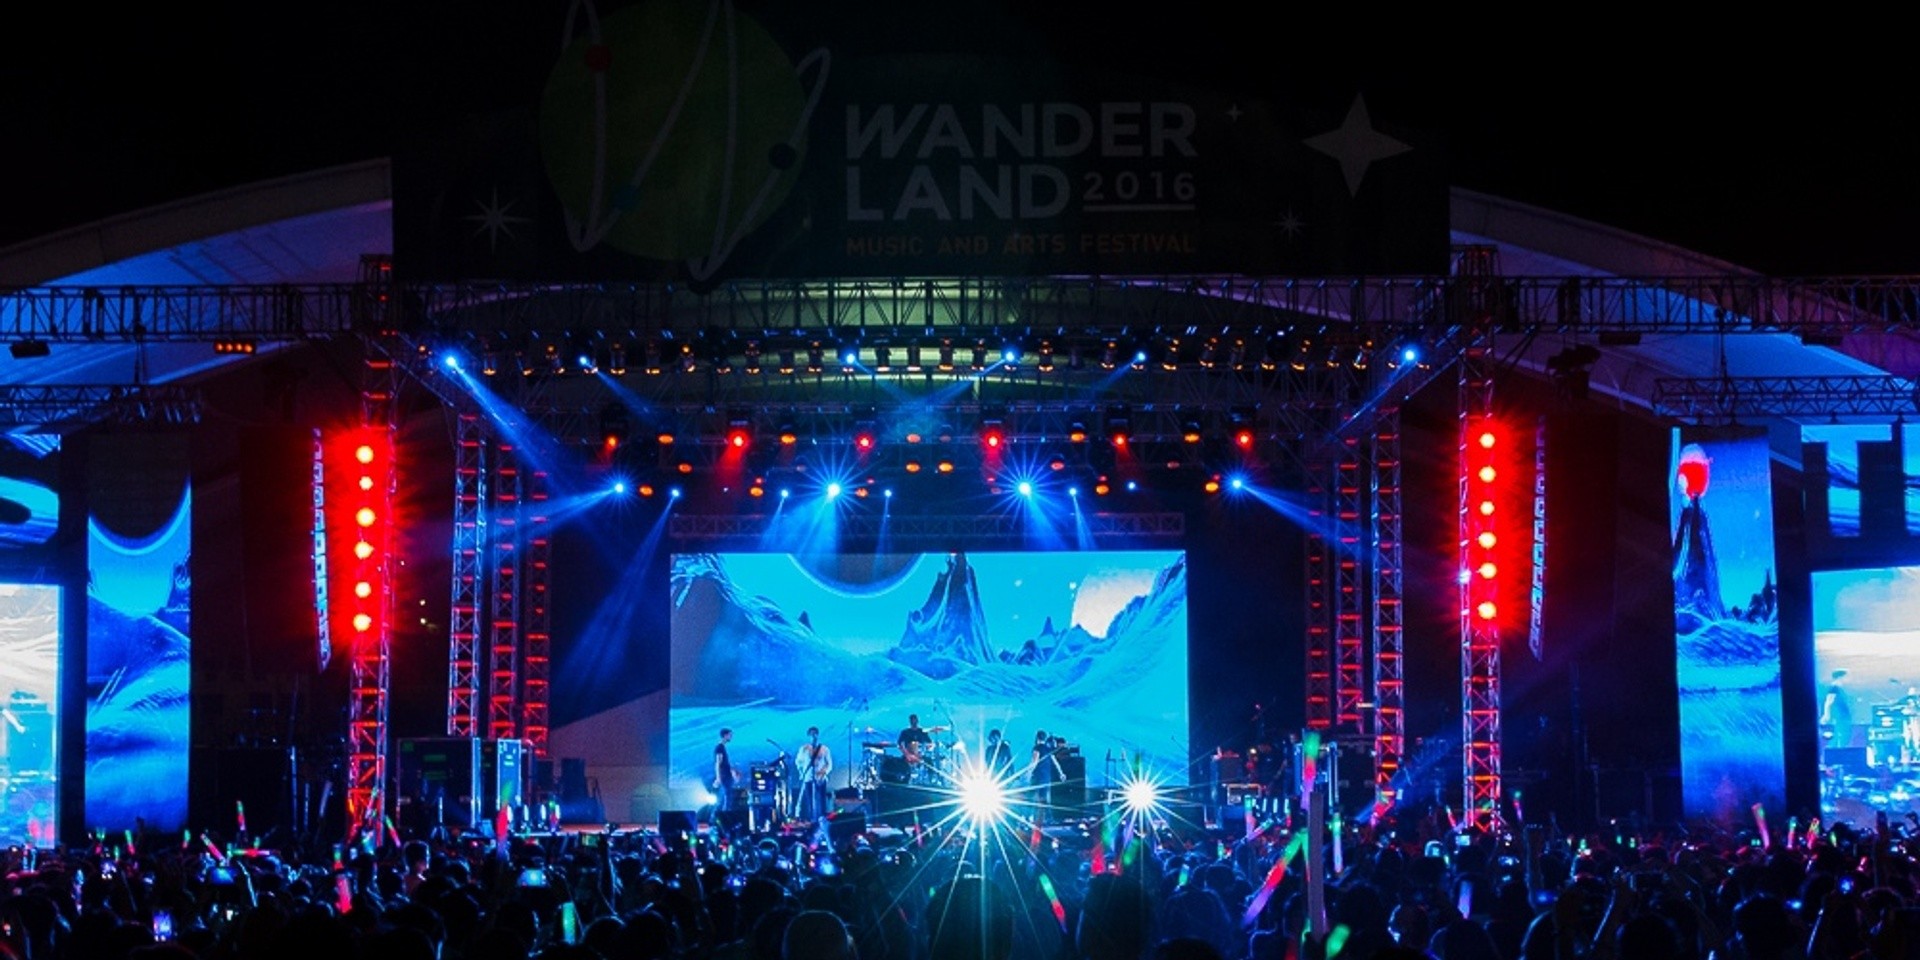 Wanderland takes us down South to Wanderland Jungle on its 5th birthday